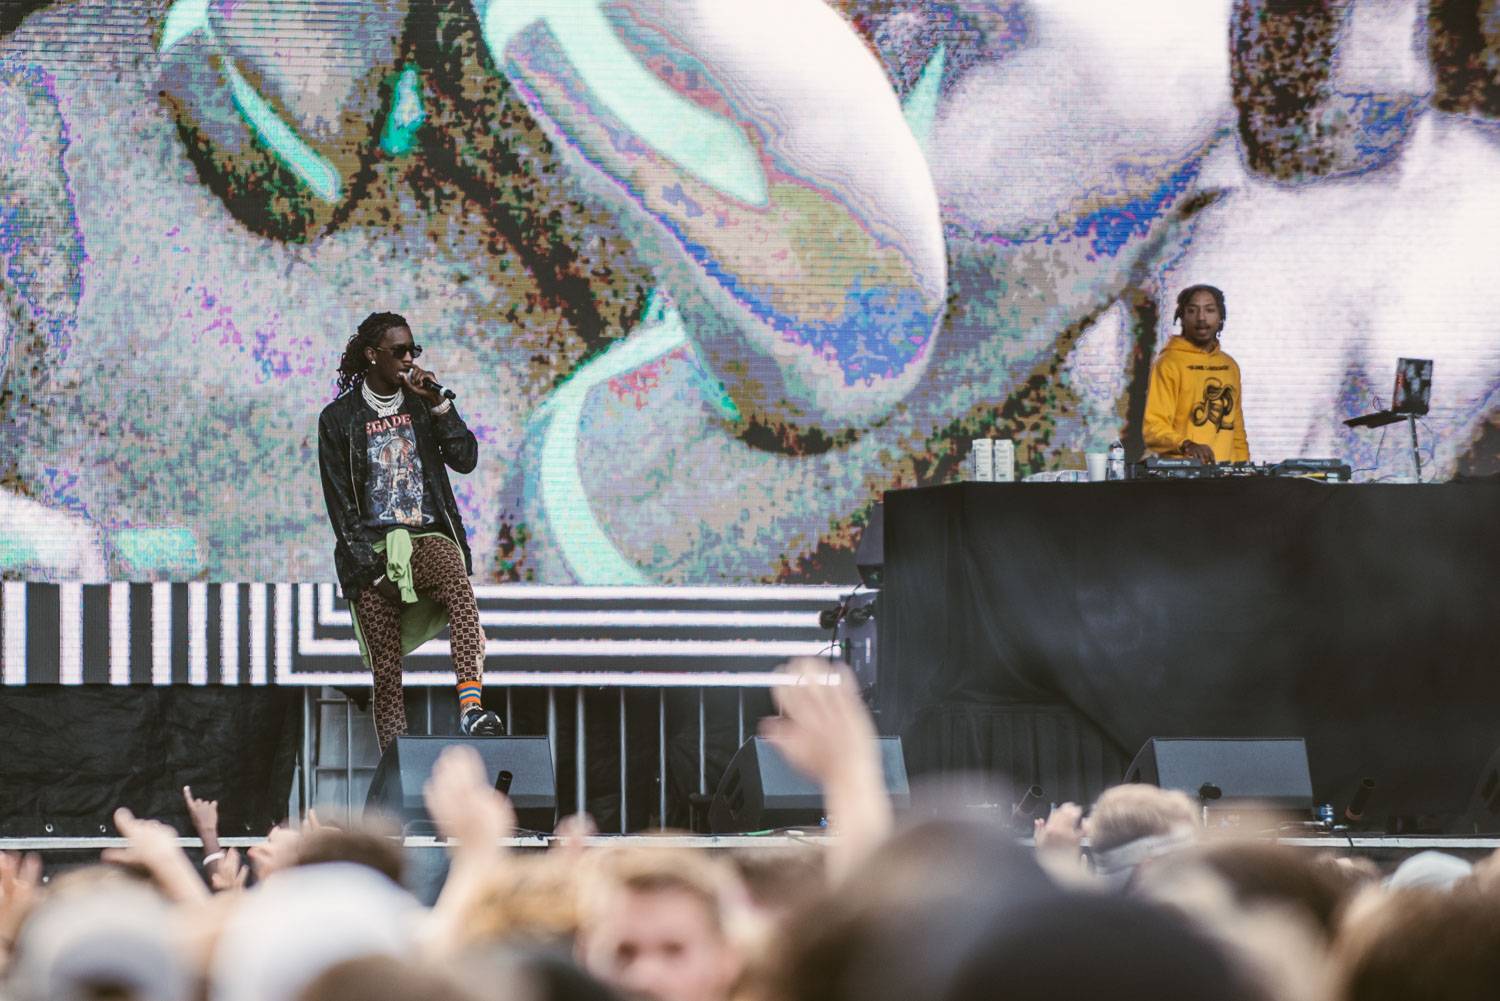 Young Thug at the Bumbershoot Music Festival 2018 - Day 2. Sept 1 2018. Pavel Boiko photo.